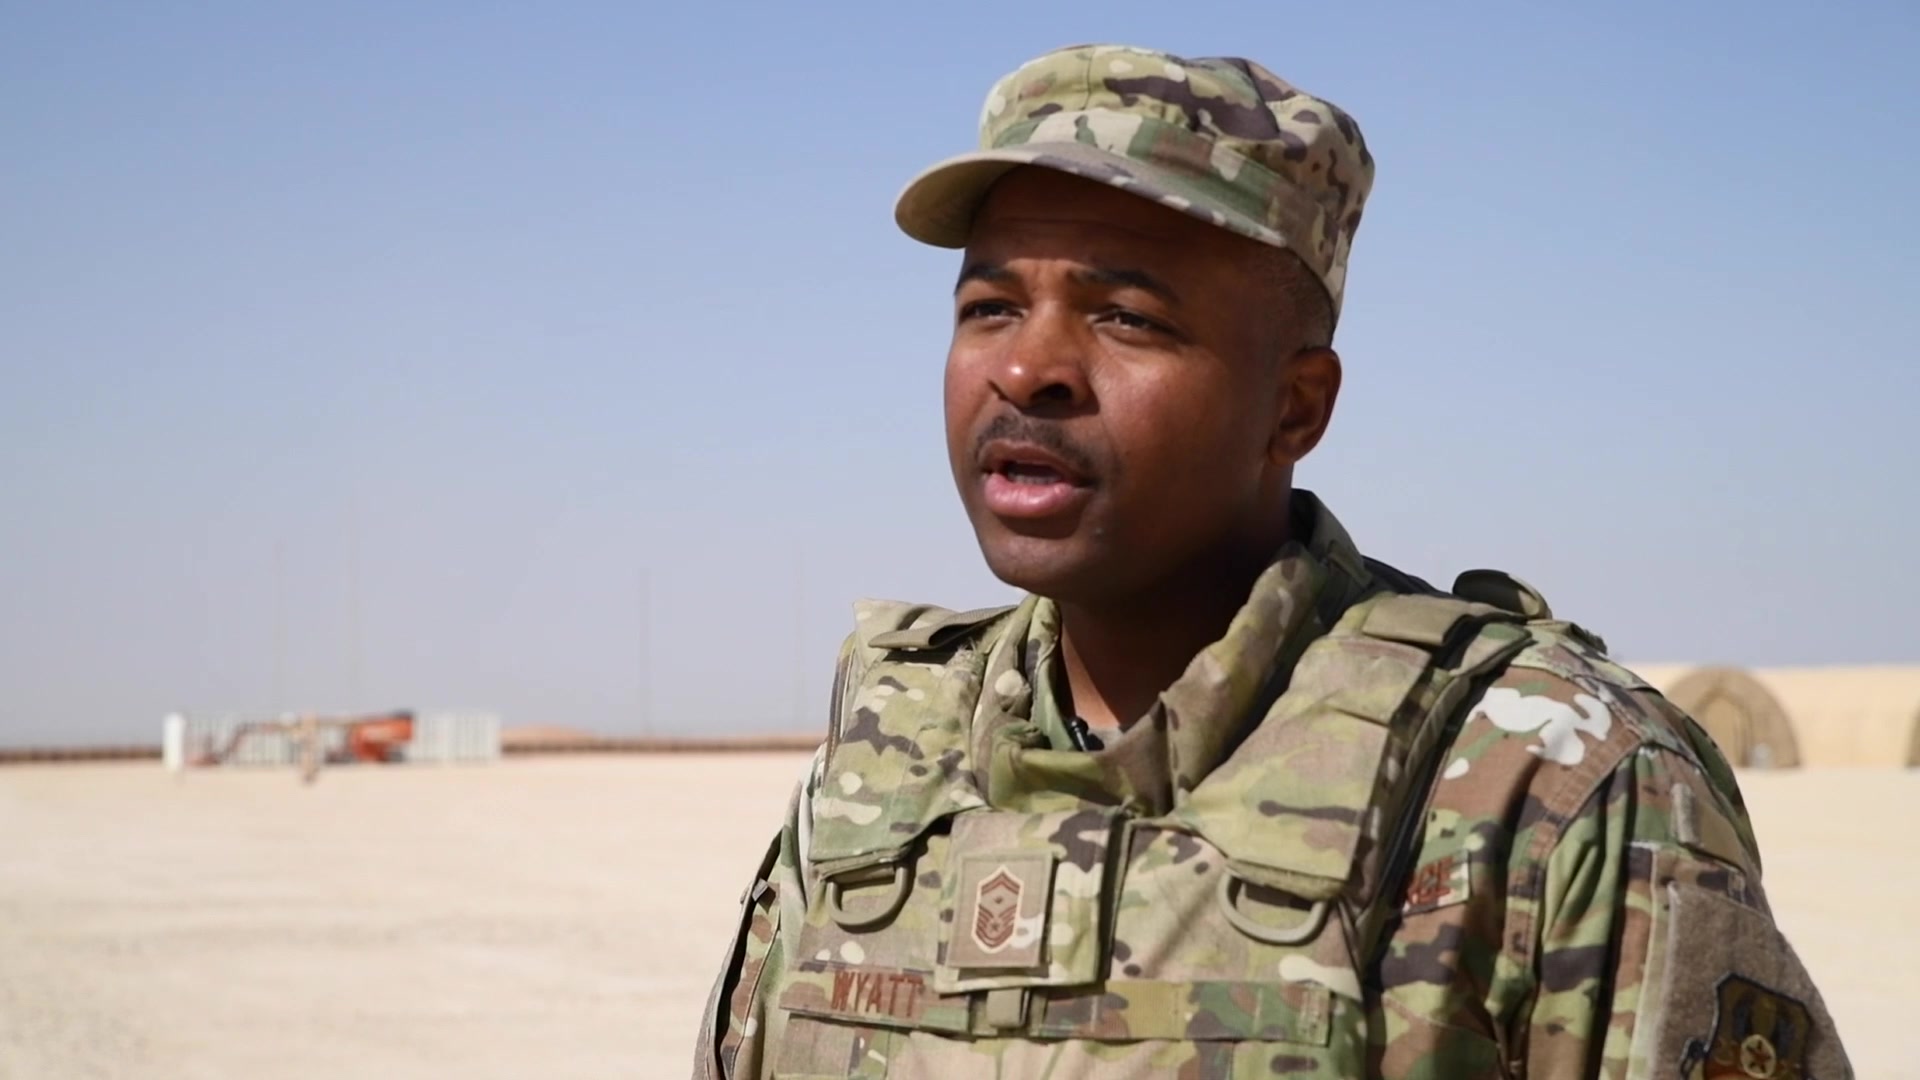 This weeks WBTC is from SMSgt Wyatt, 378th Expeditionary Civil Engineer Squadron first sergenat. He talks about his role as the first shirt at Prince Sultan Air Base, Kingdom of Saudi Arabia since 2003.